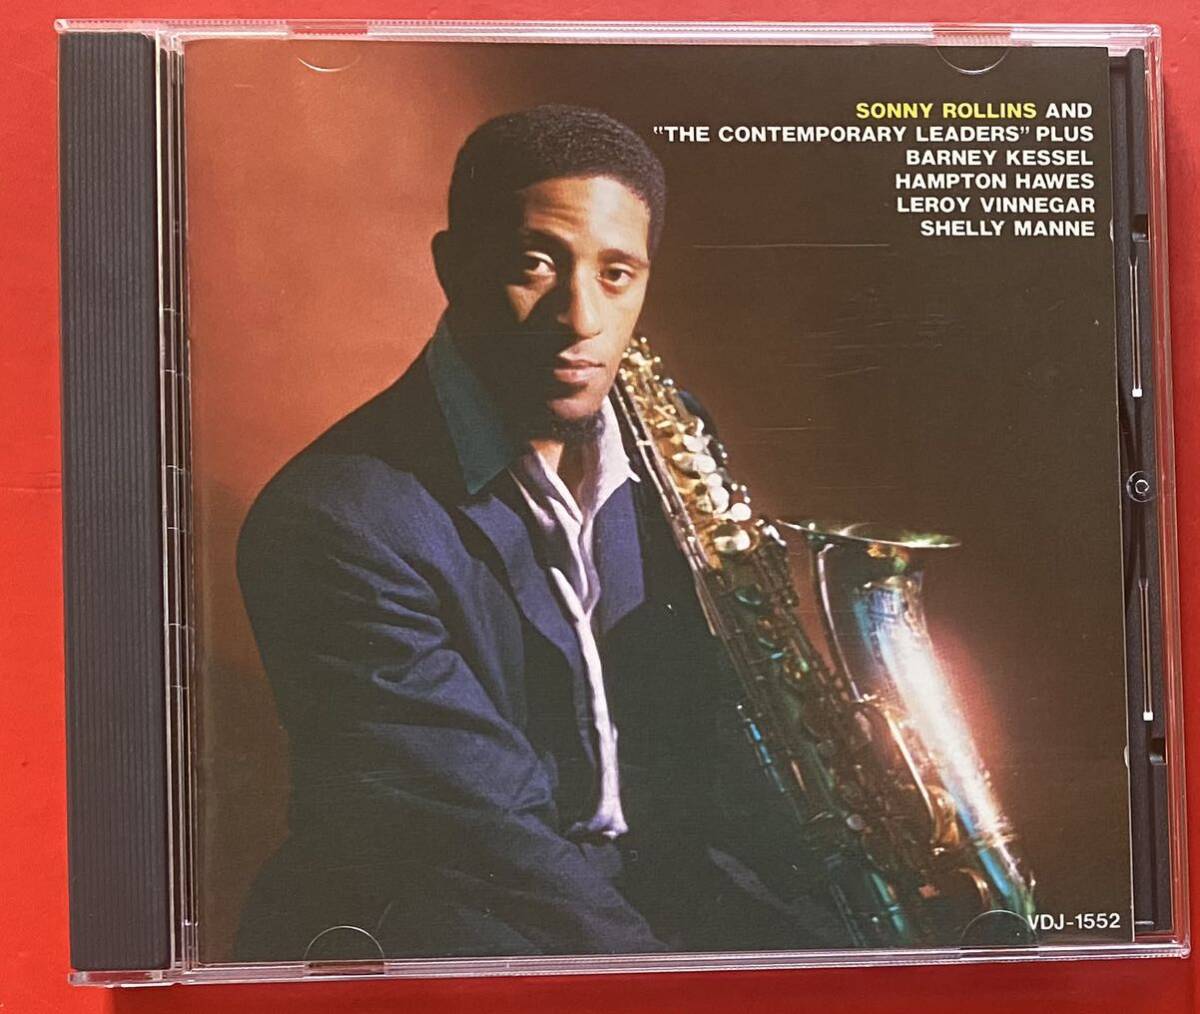 【CD】ソニー・ロリンズ「THE CONTEMPORARY LEADERS PLUS」SONNY ROLLINS 国内盤 盤面良好 [01290350]の画像1